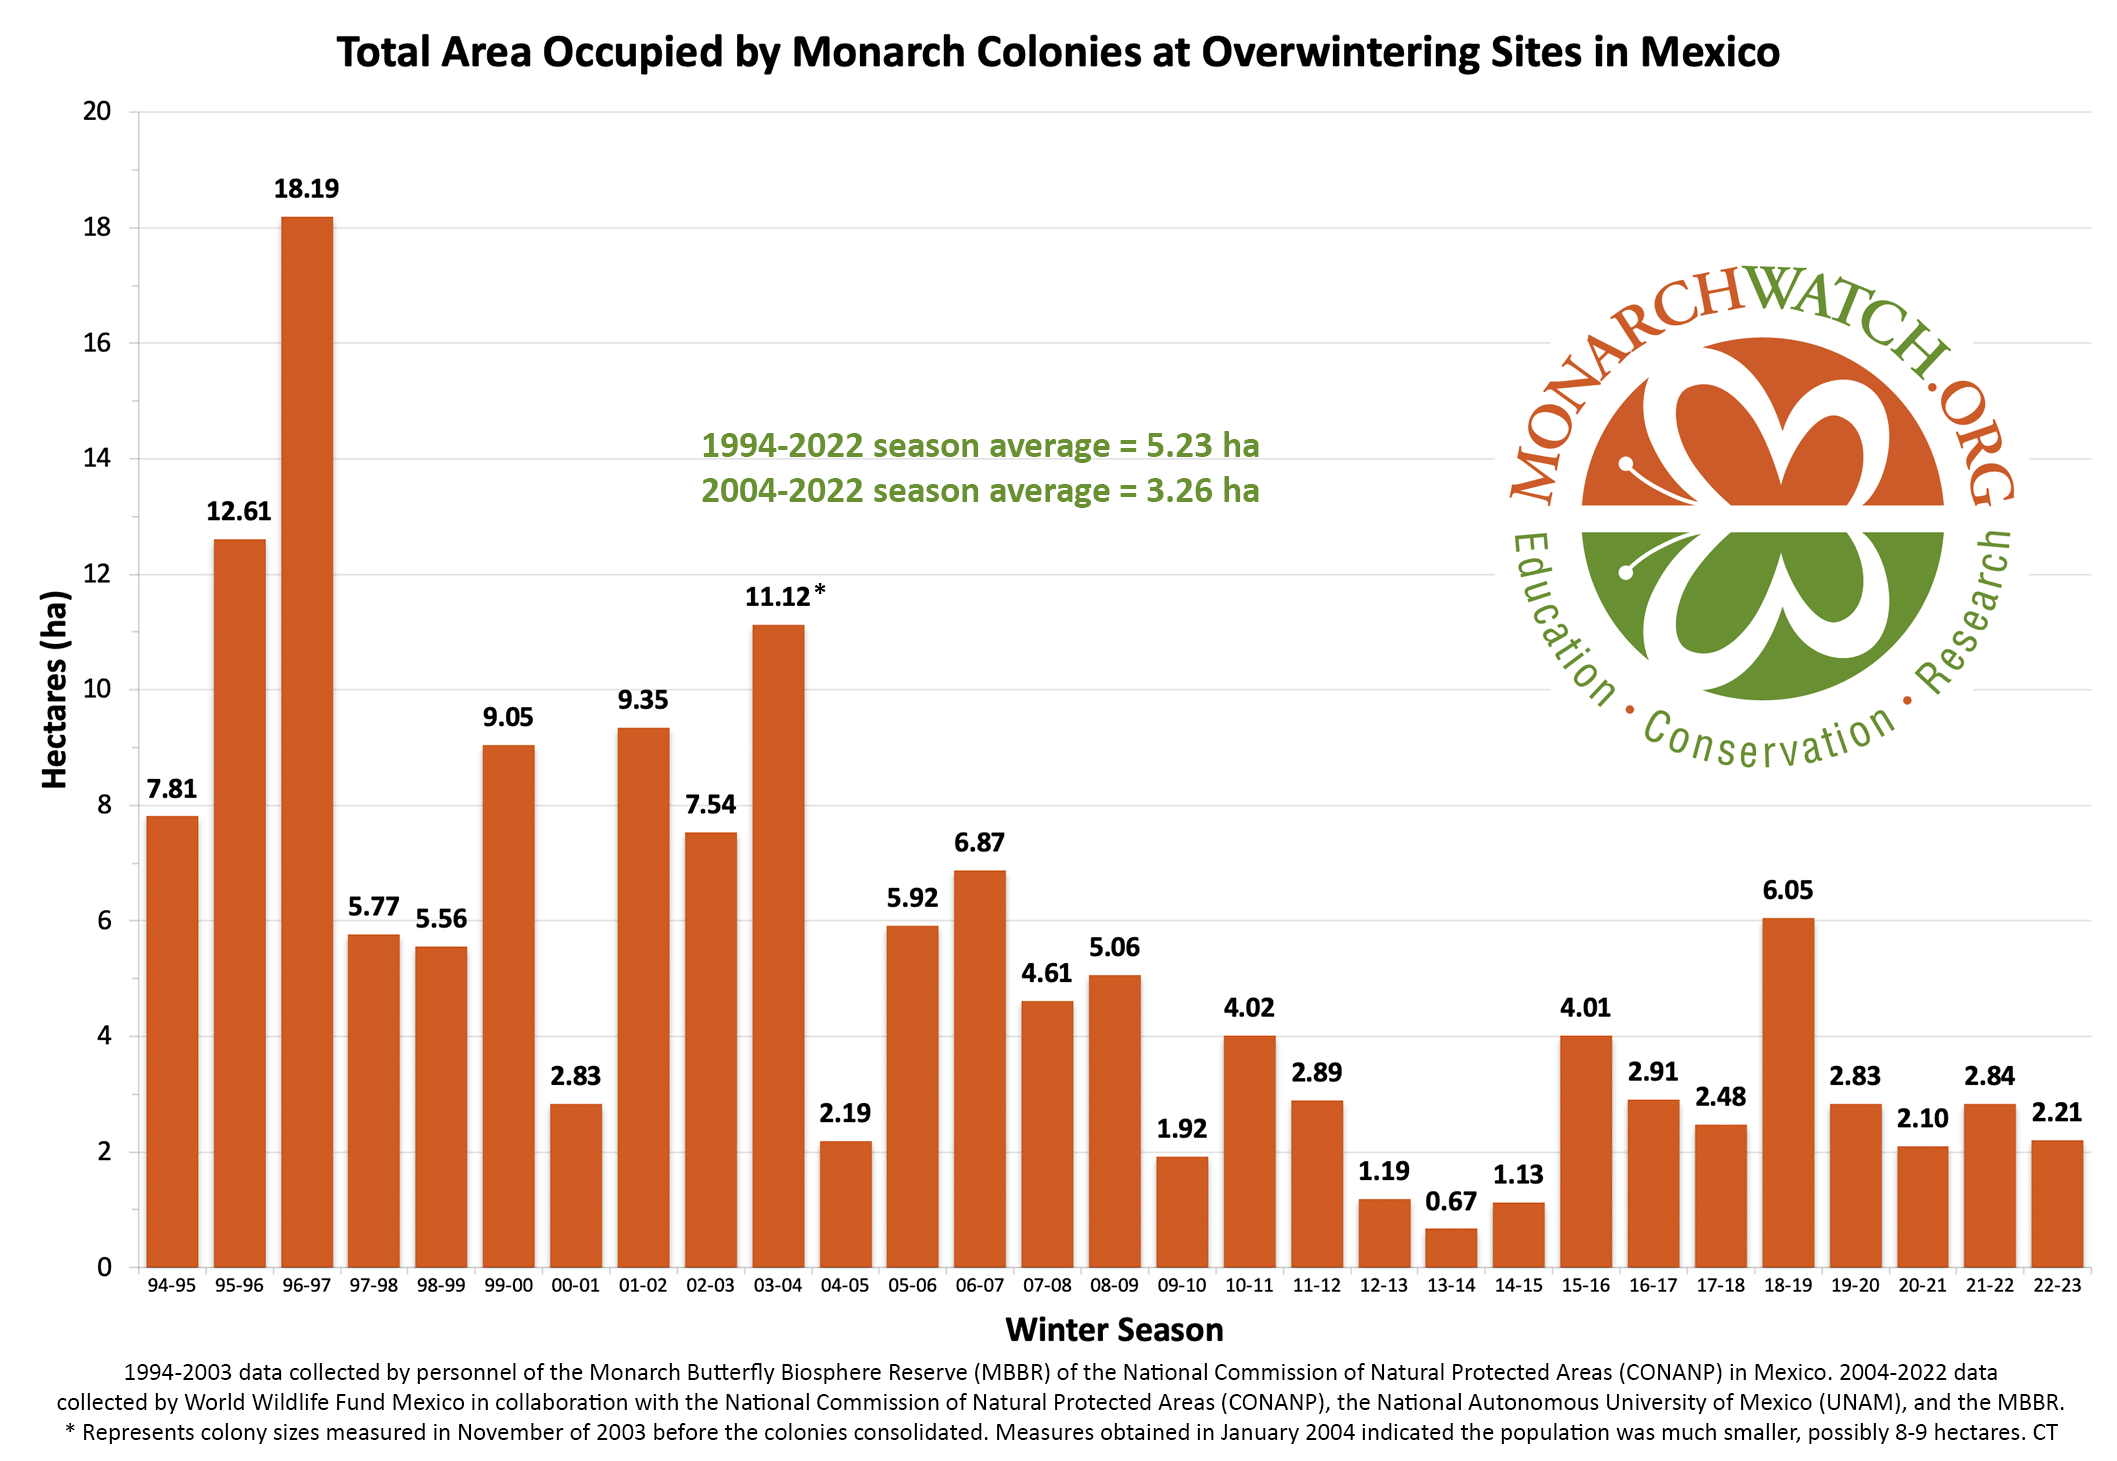 A graph of the total area occupied by monarch colonies at overwintering sites in Mexico with the years on the x-axis and the hectares occupied on the y-axis